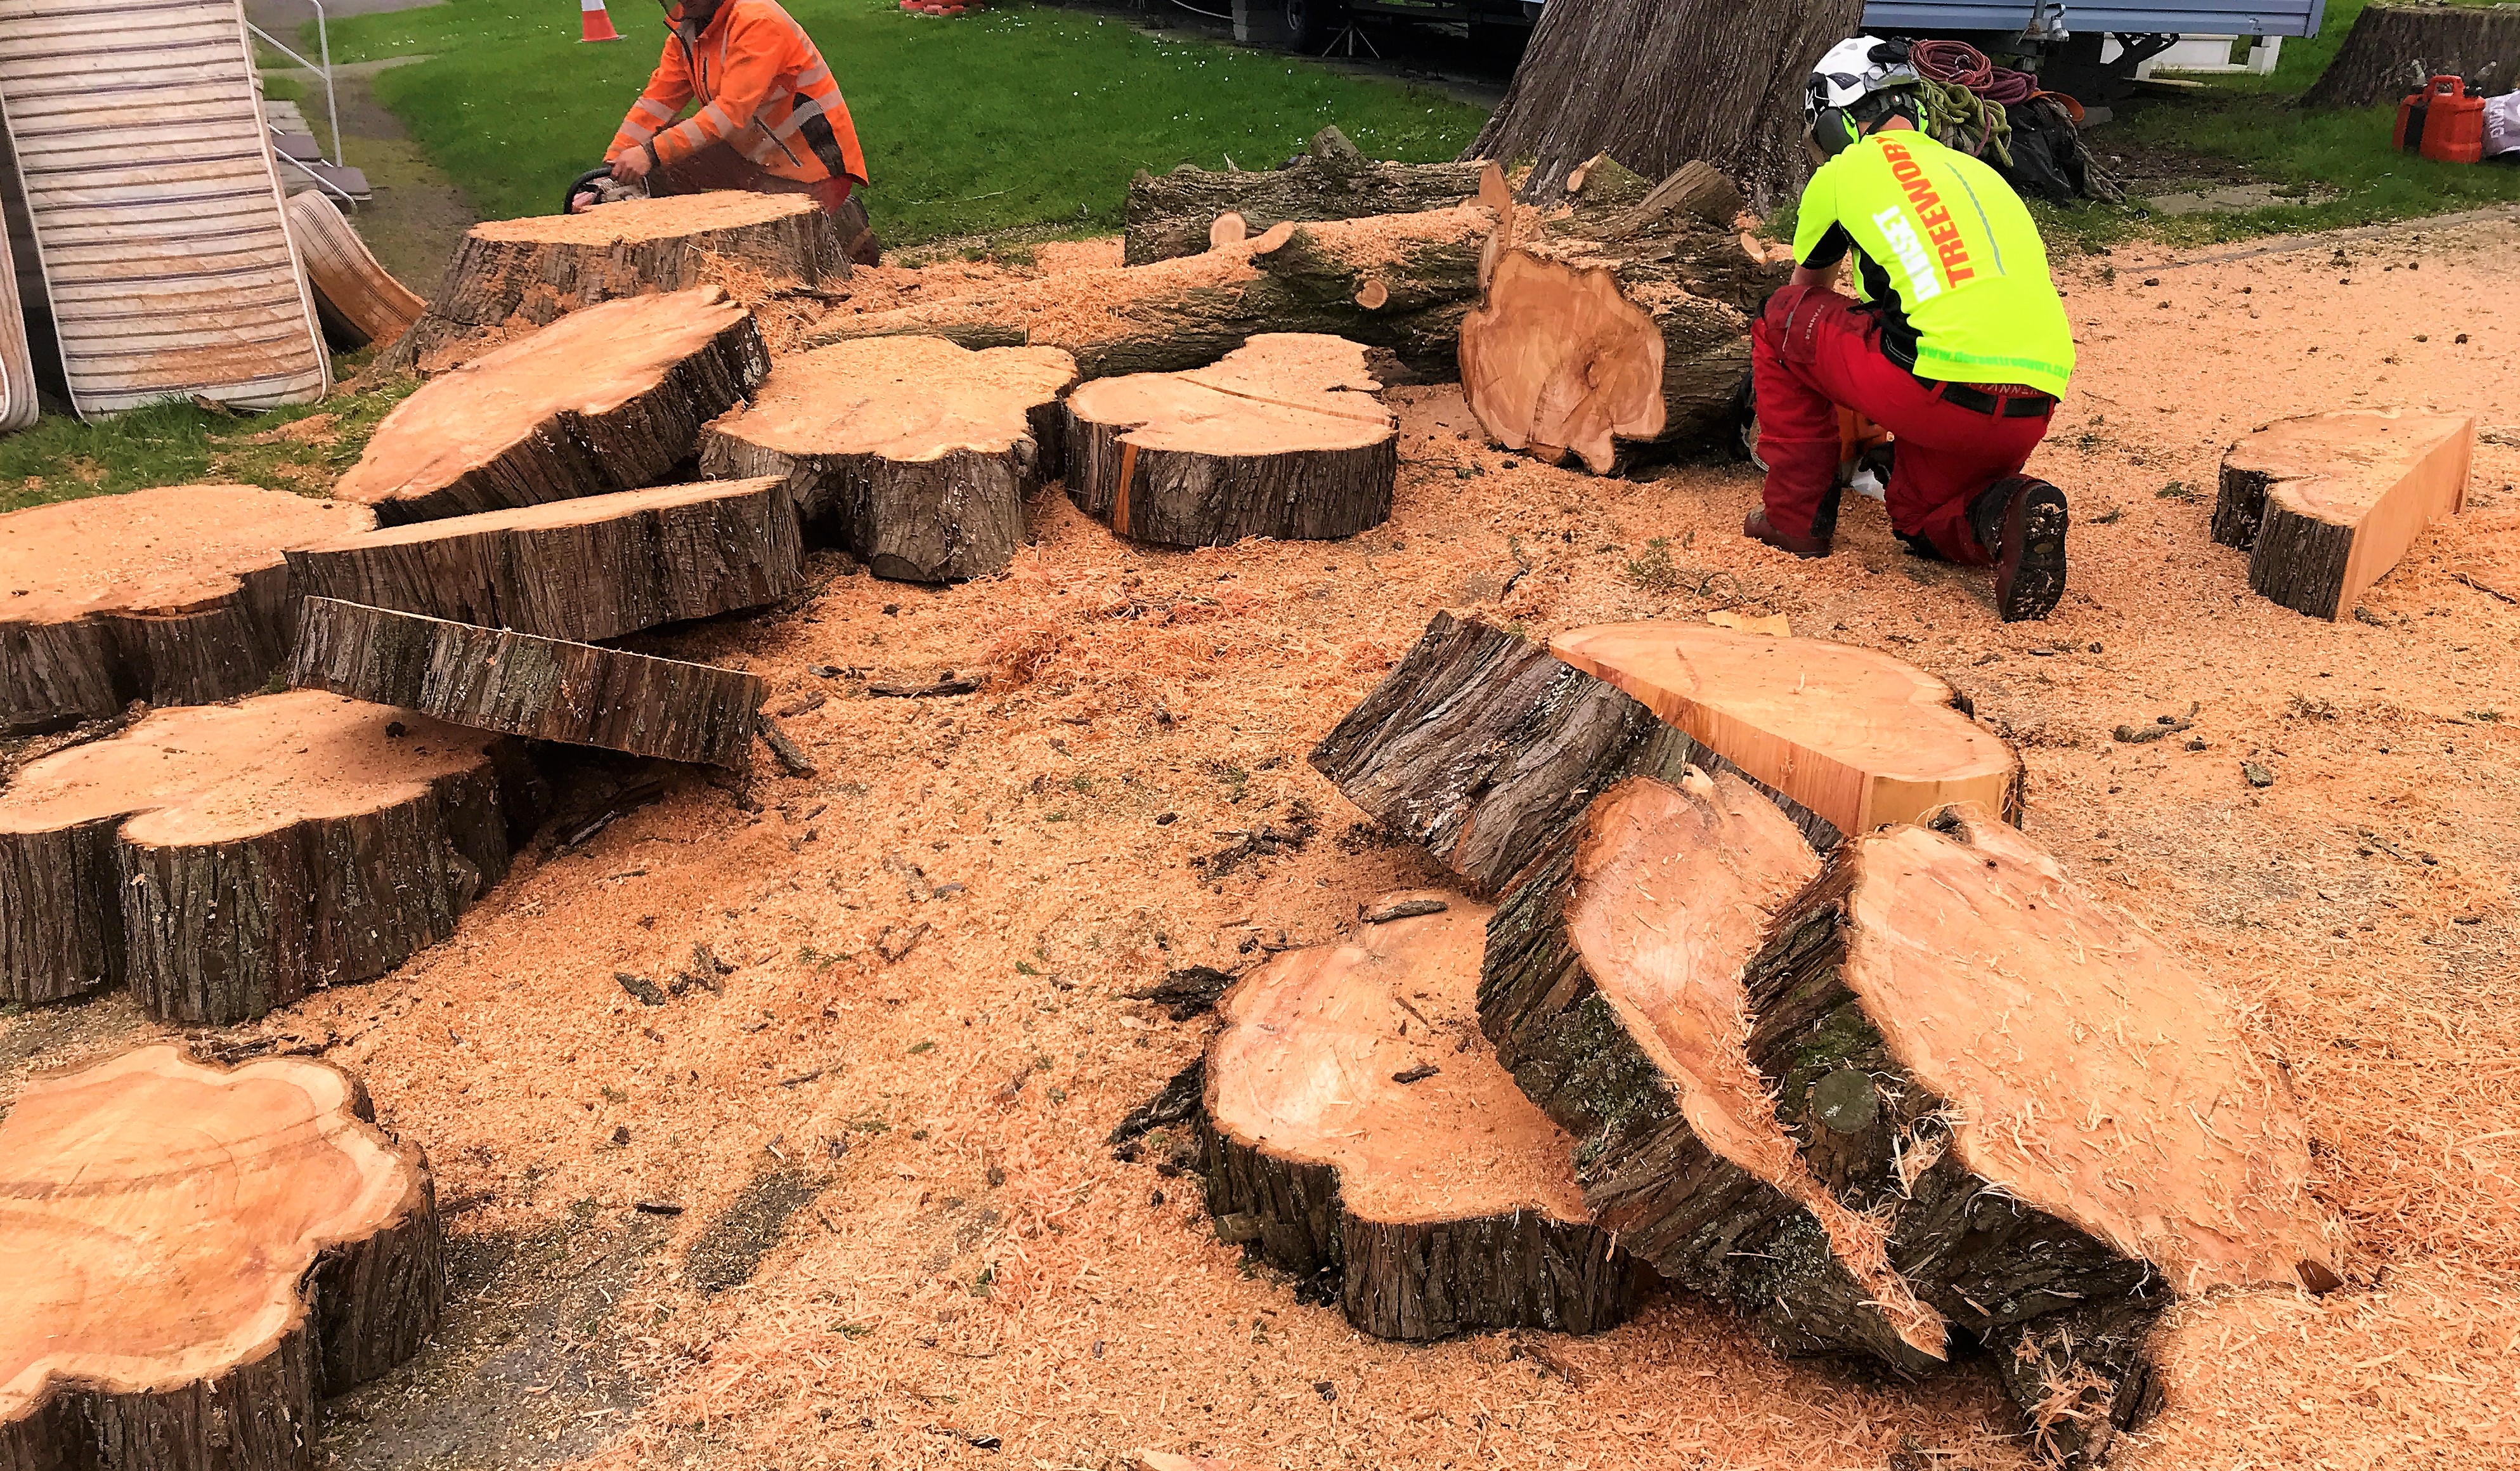 Weymouth tree surgery team offering tree removal, tree felling, tree dismantling in Weymouth, Dorchester, Portland, Dorset